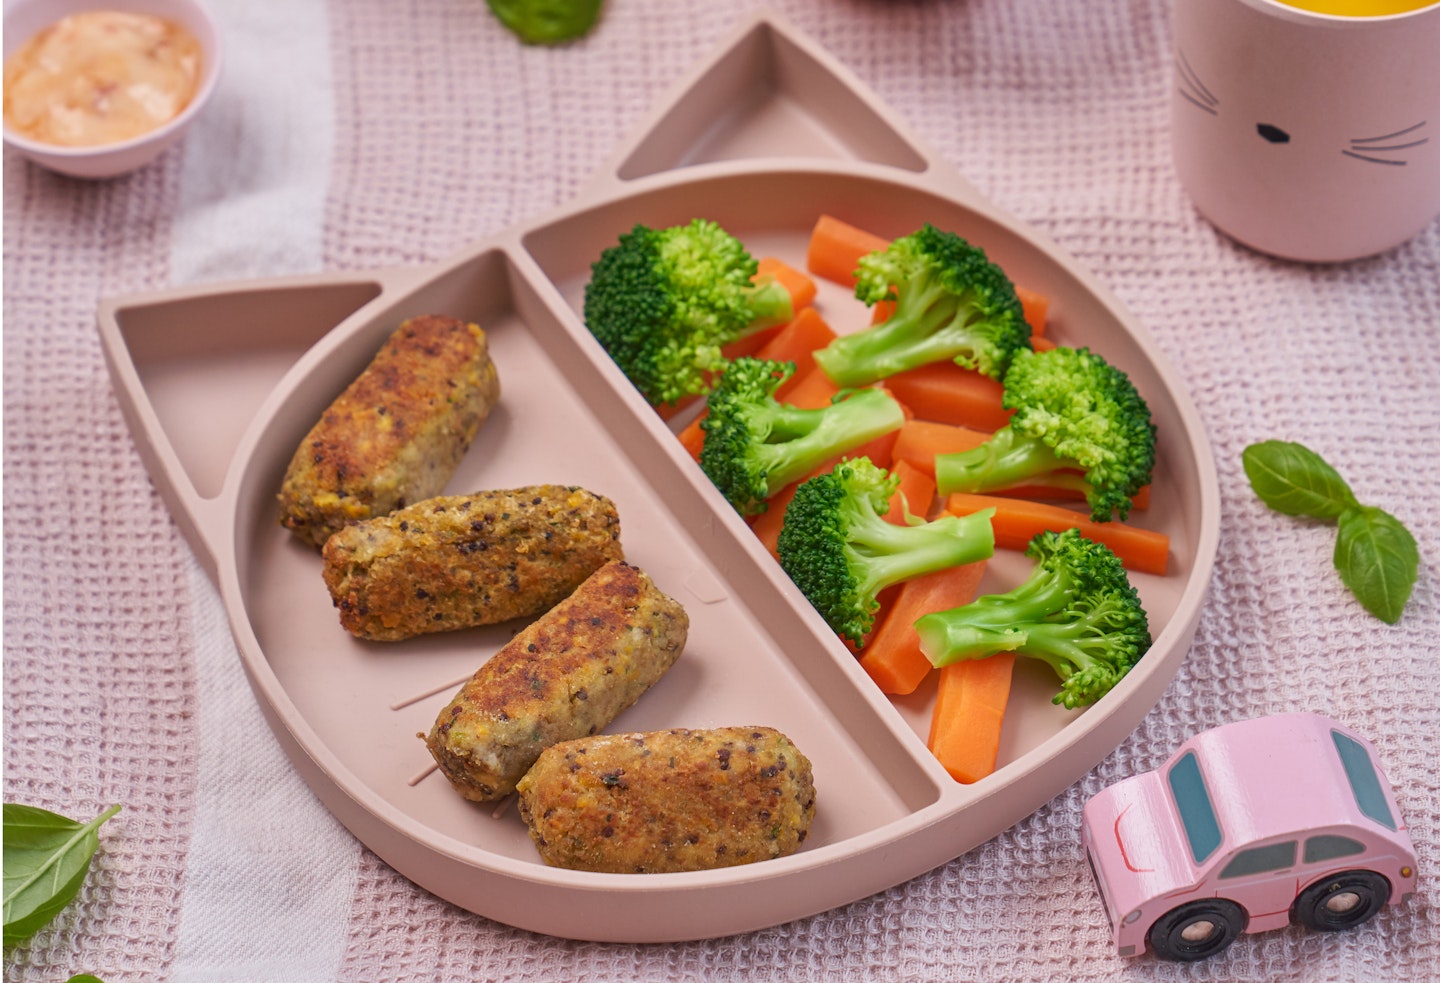 Annabel Karmel's quinoa and vegetable croquettes